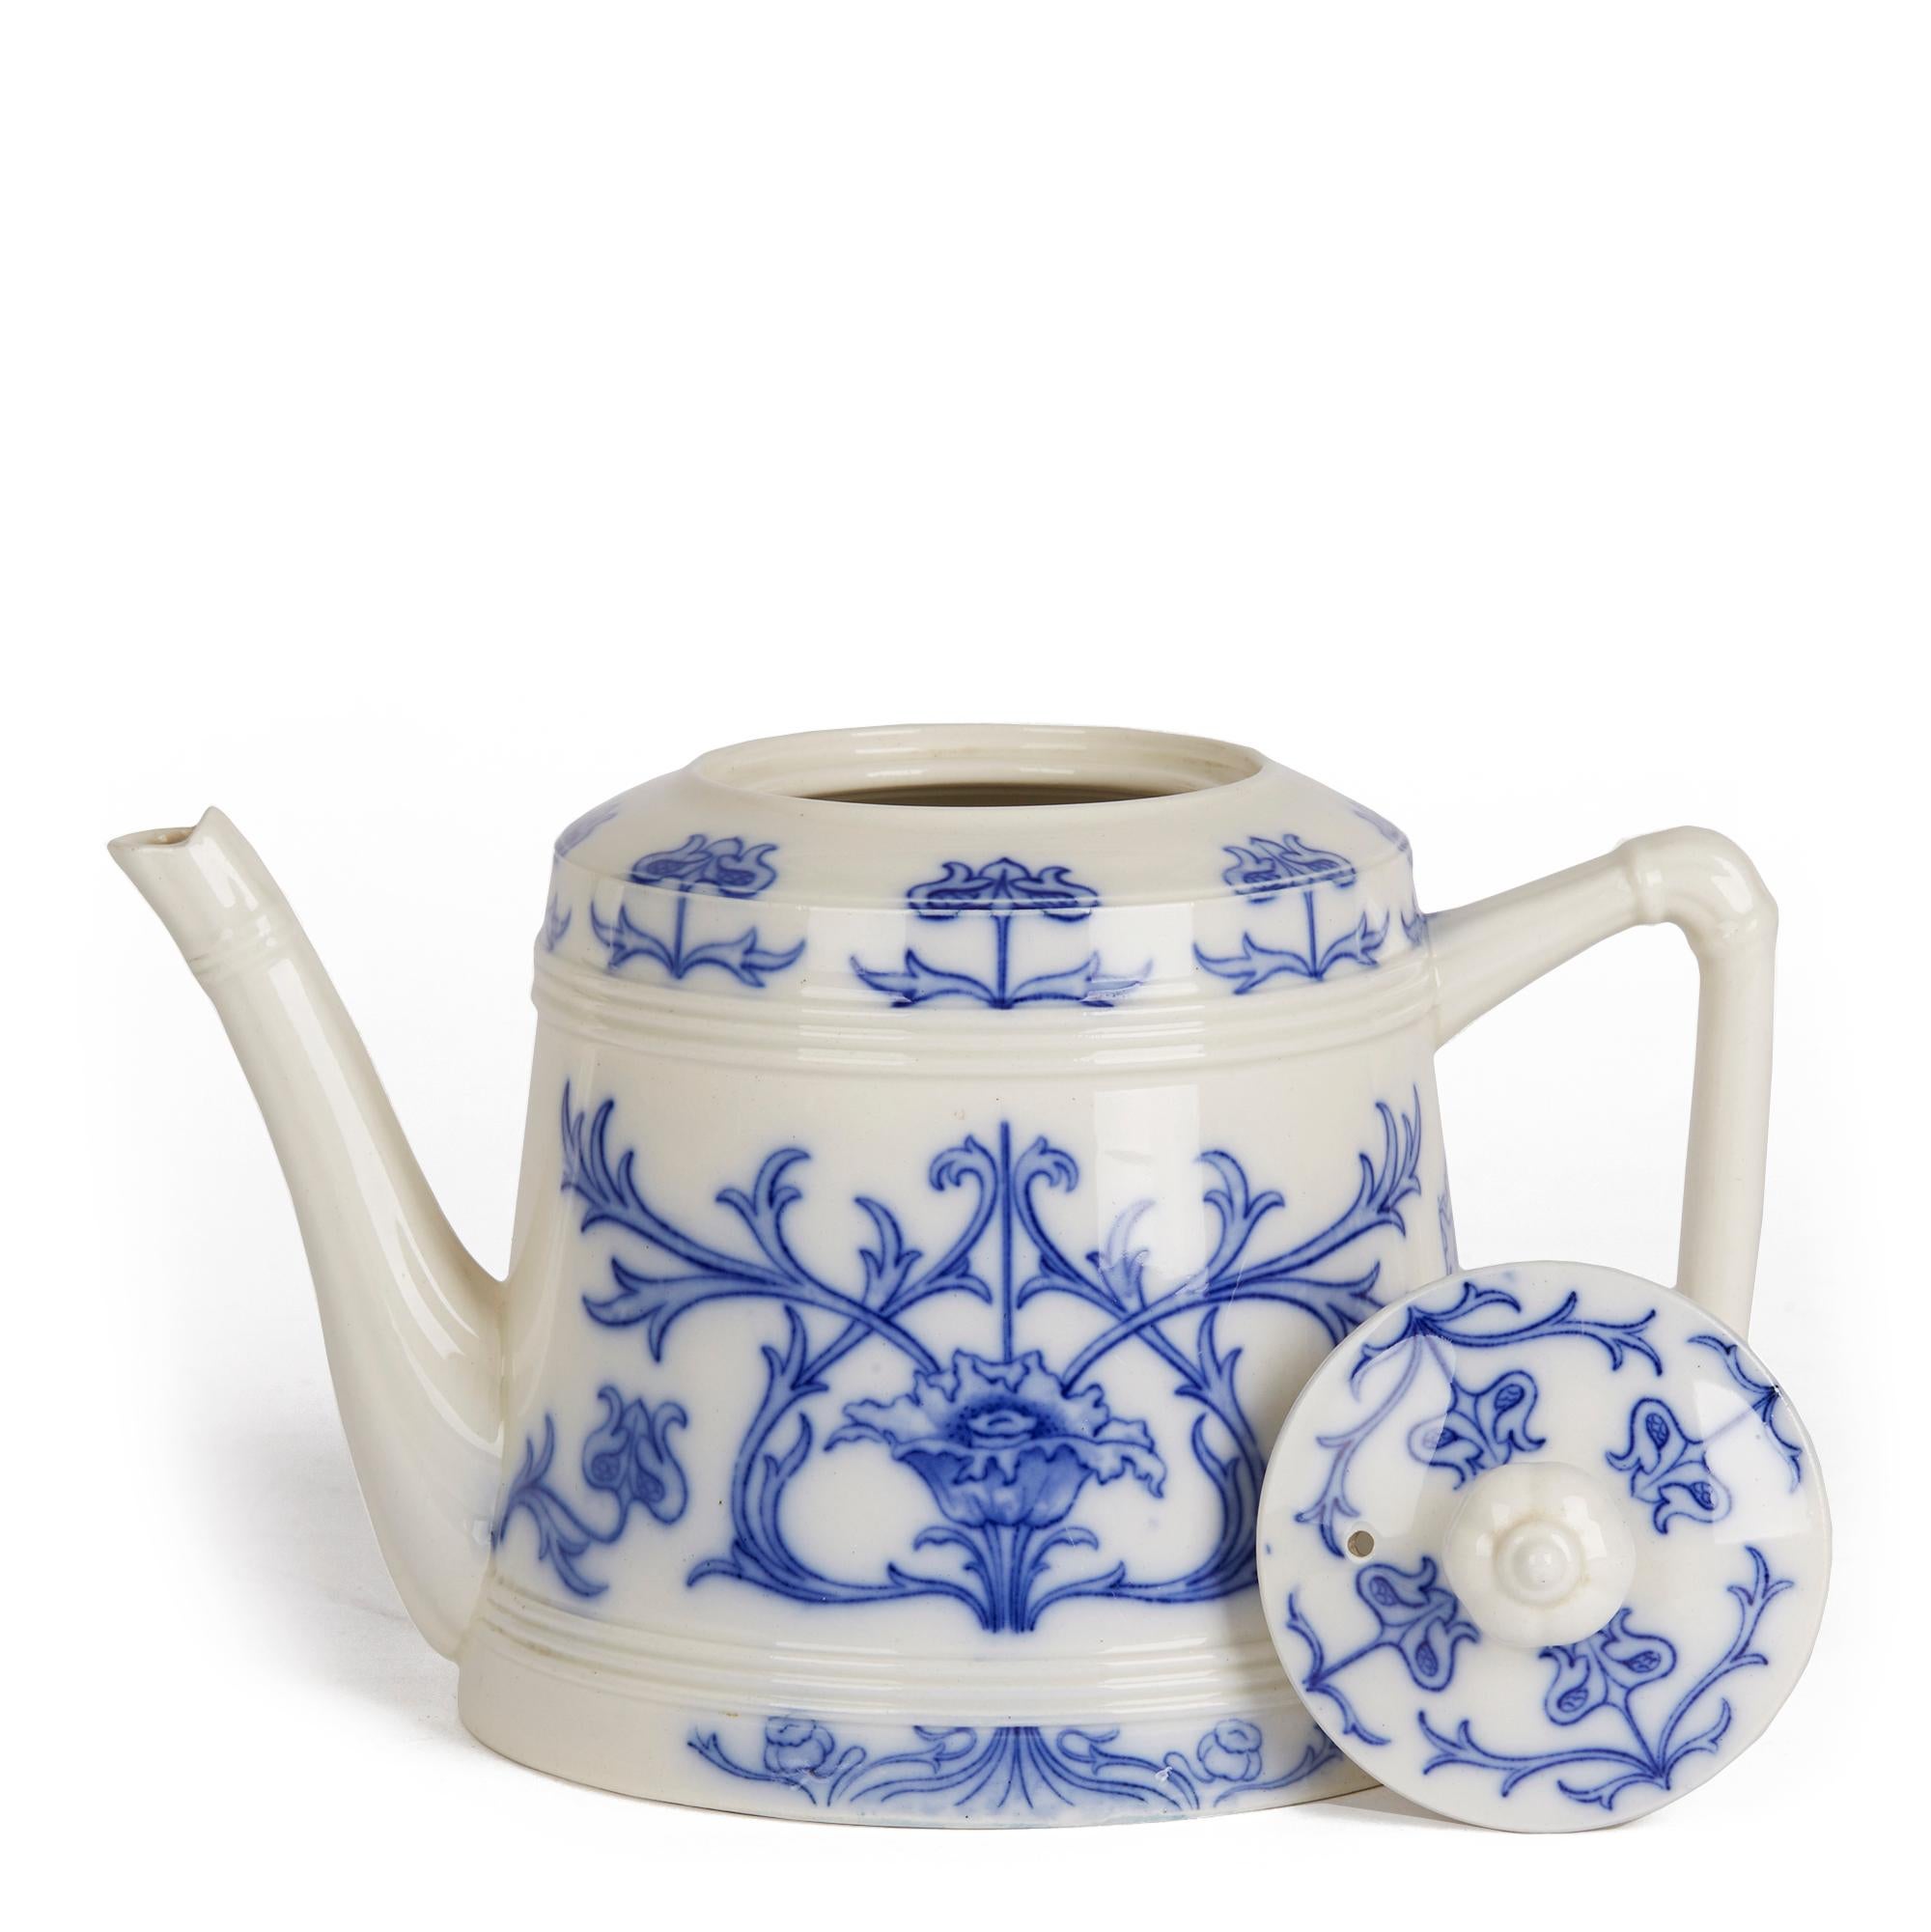 A rare and early blue and white Art Nouveau Aurelian ware teapot and cover of rounded cylindrical shape with moulded shaped handle and shaped spout with a recessed cover. The teapot has typical period designs with floral buds and flowers set with